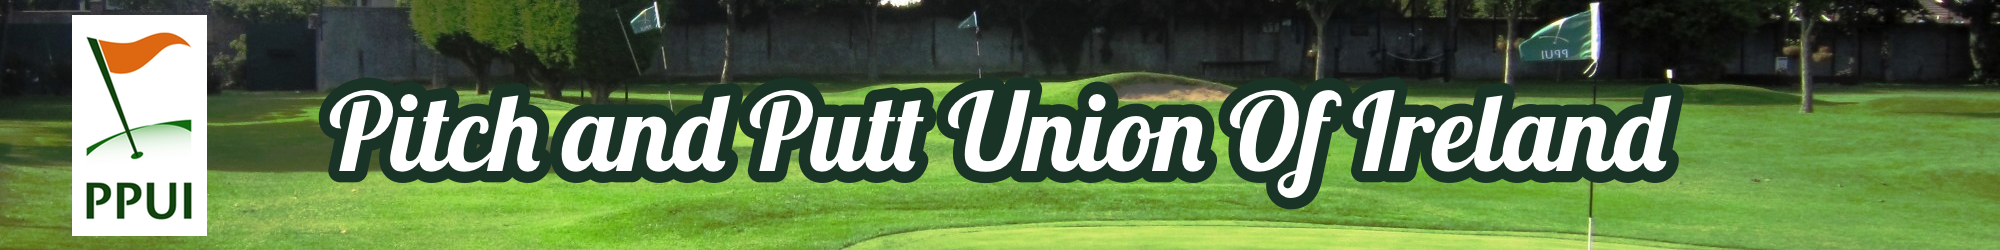 Pitch and Putt Union of Ireland Banner